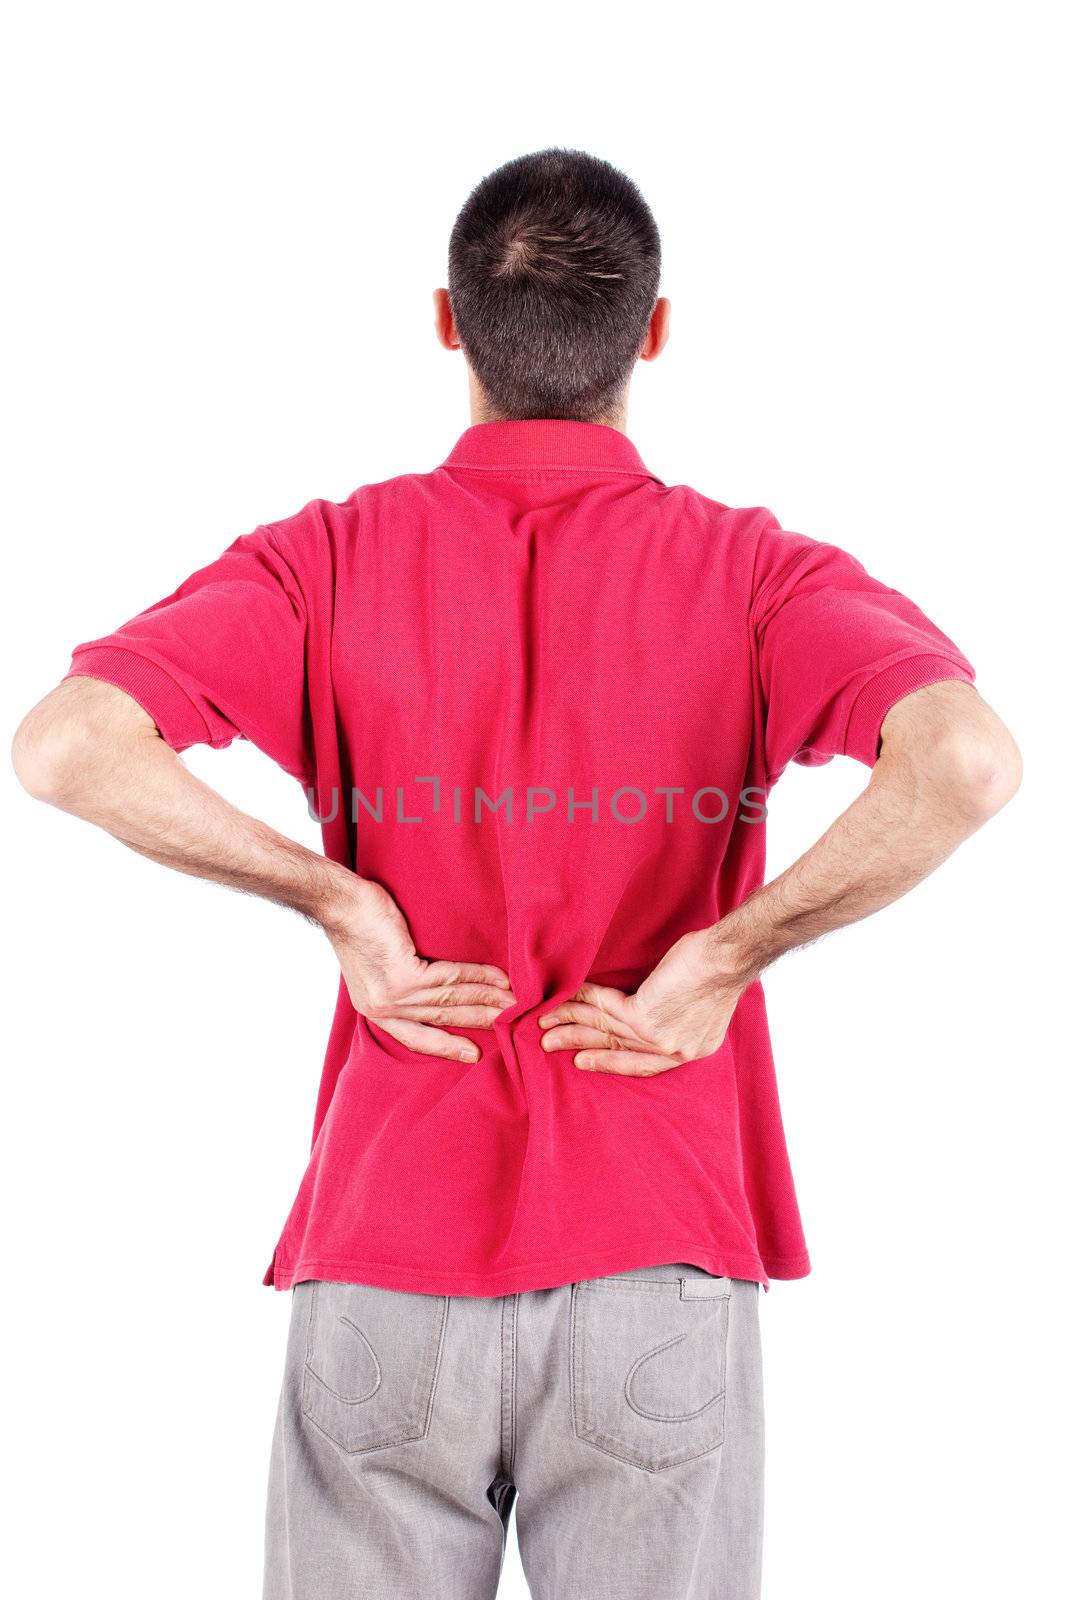 Man have problem with spine, isolated on white background